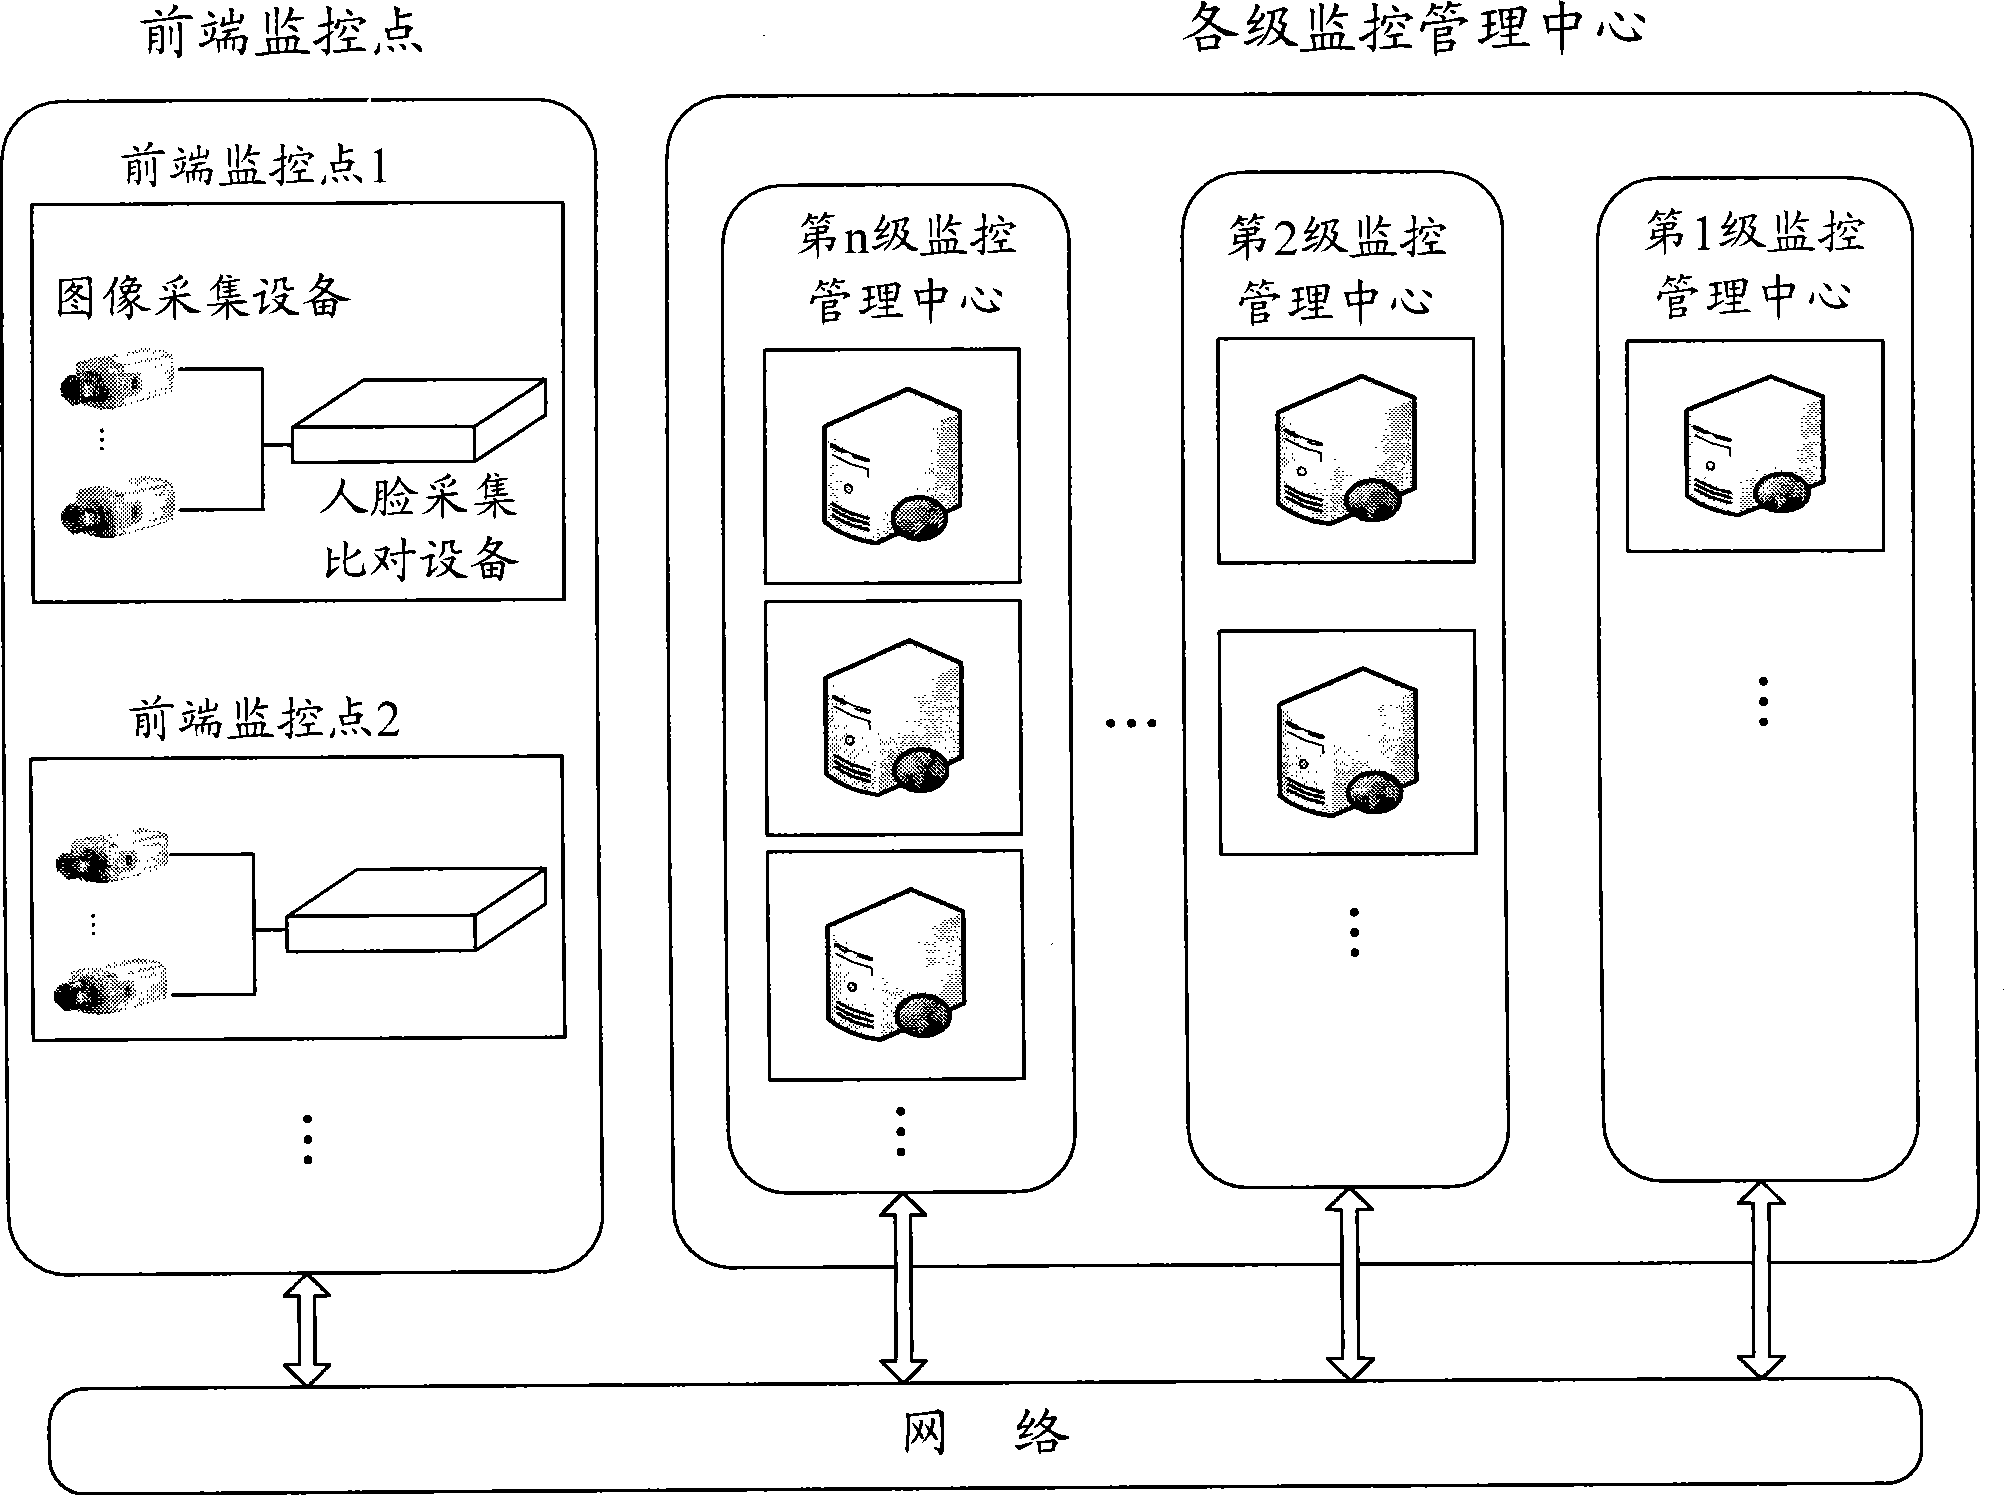 Human face collecting identification monitoring system and method for hotel, office building and public place for entertainment